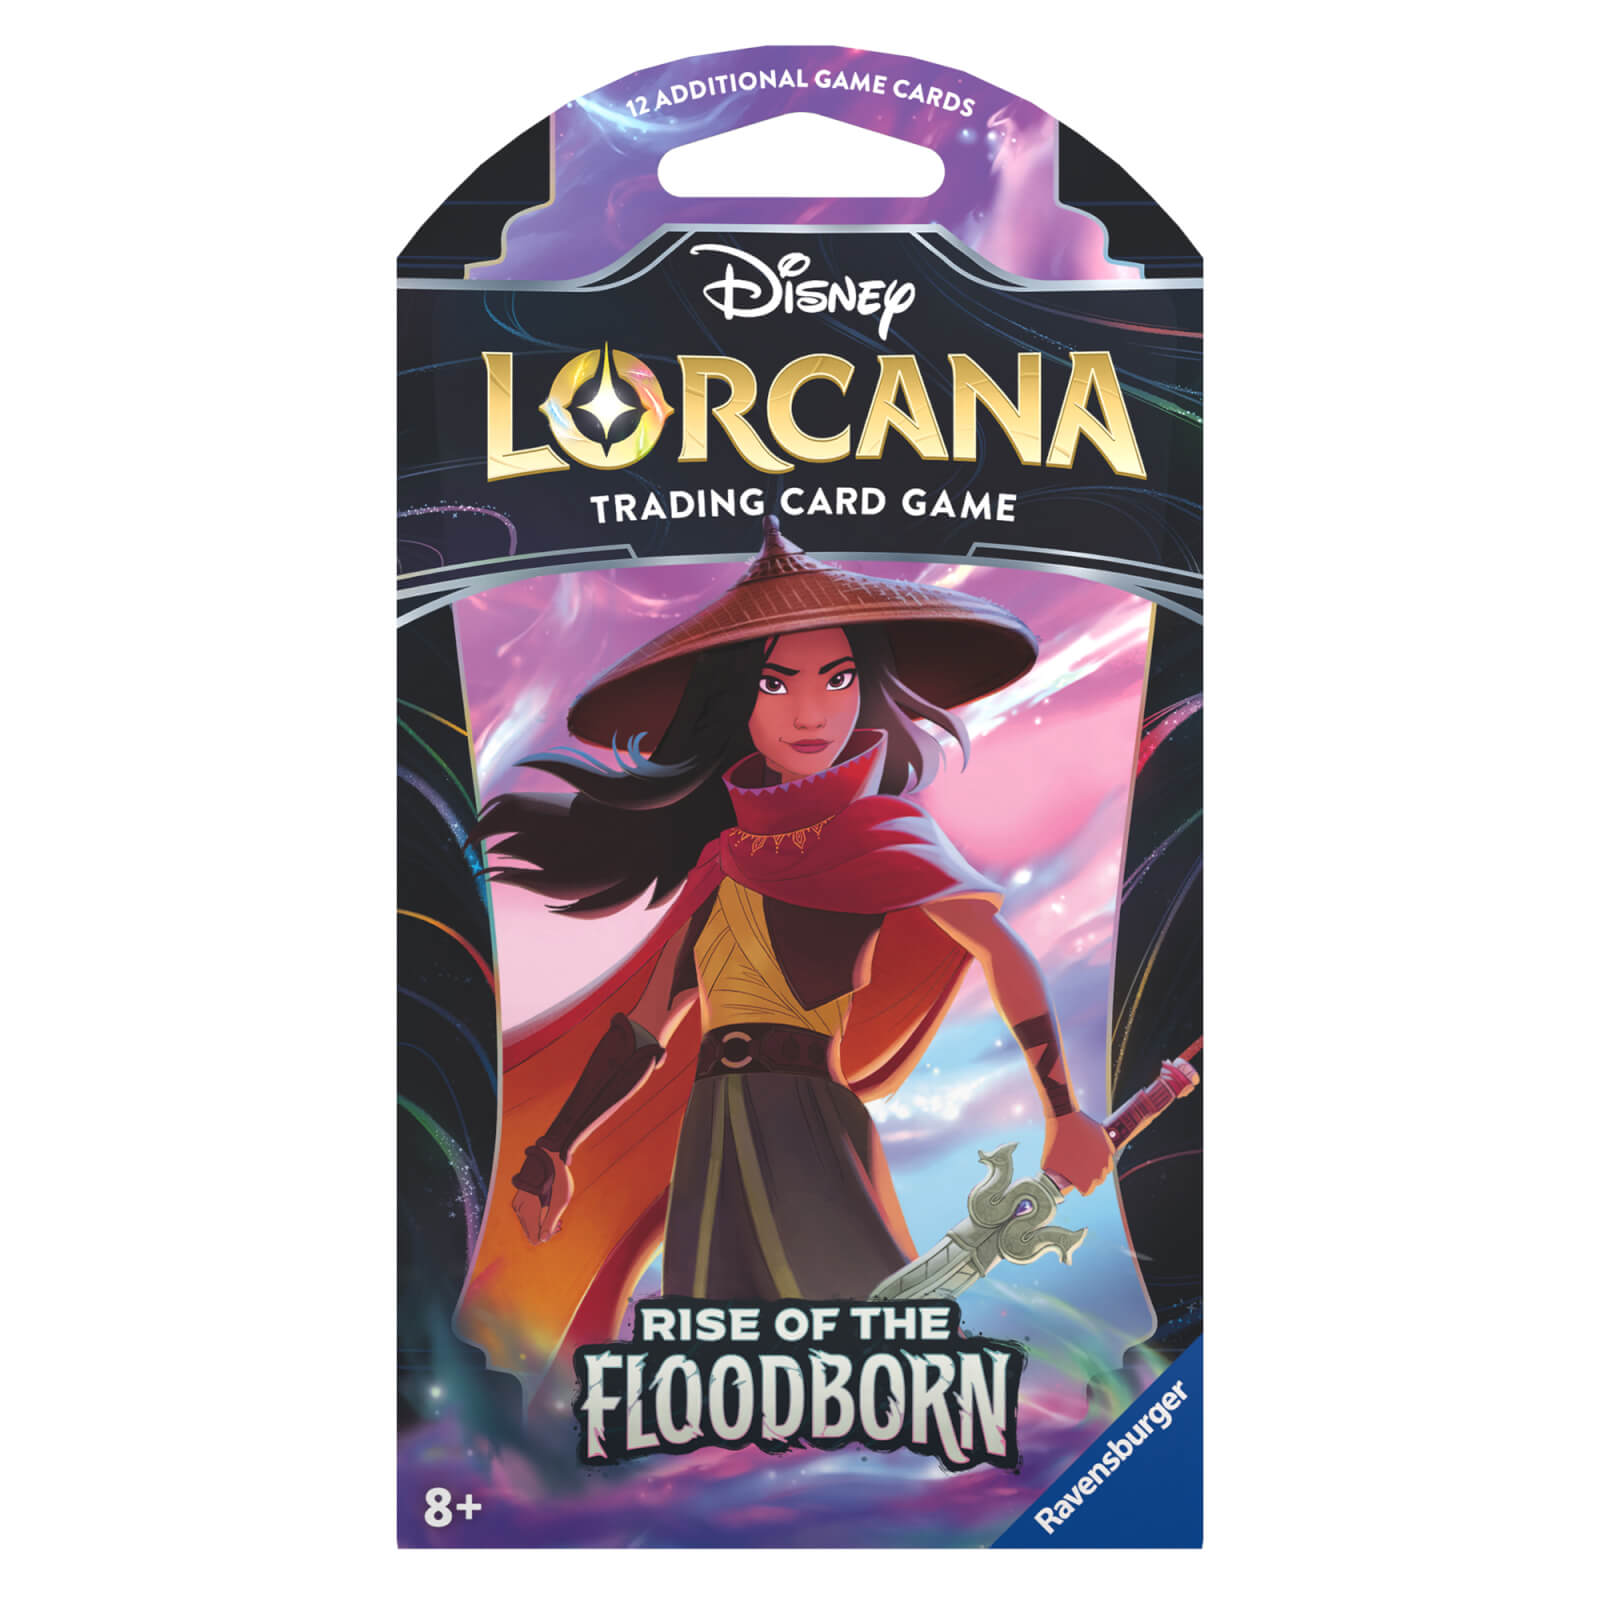 Disney Lorcana Trading Card Game Rise of the Floodborn Sleeved Booster Packs CDU (42 Packs)